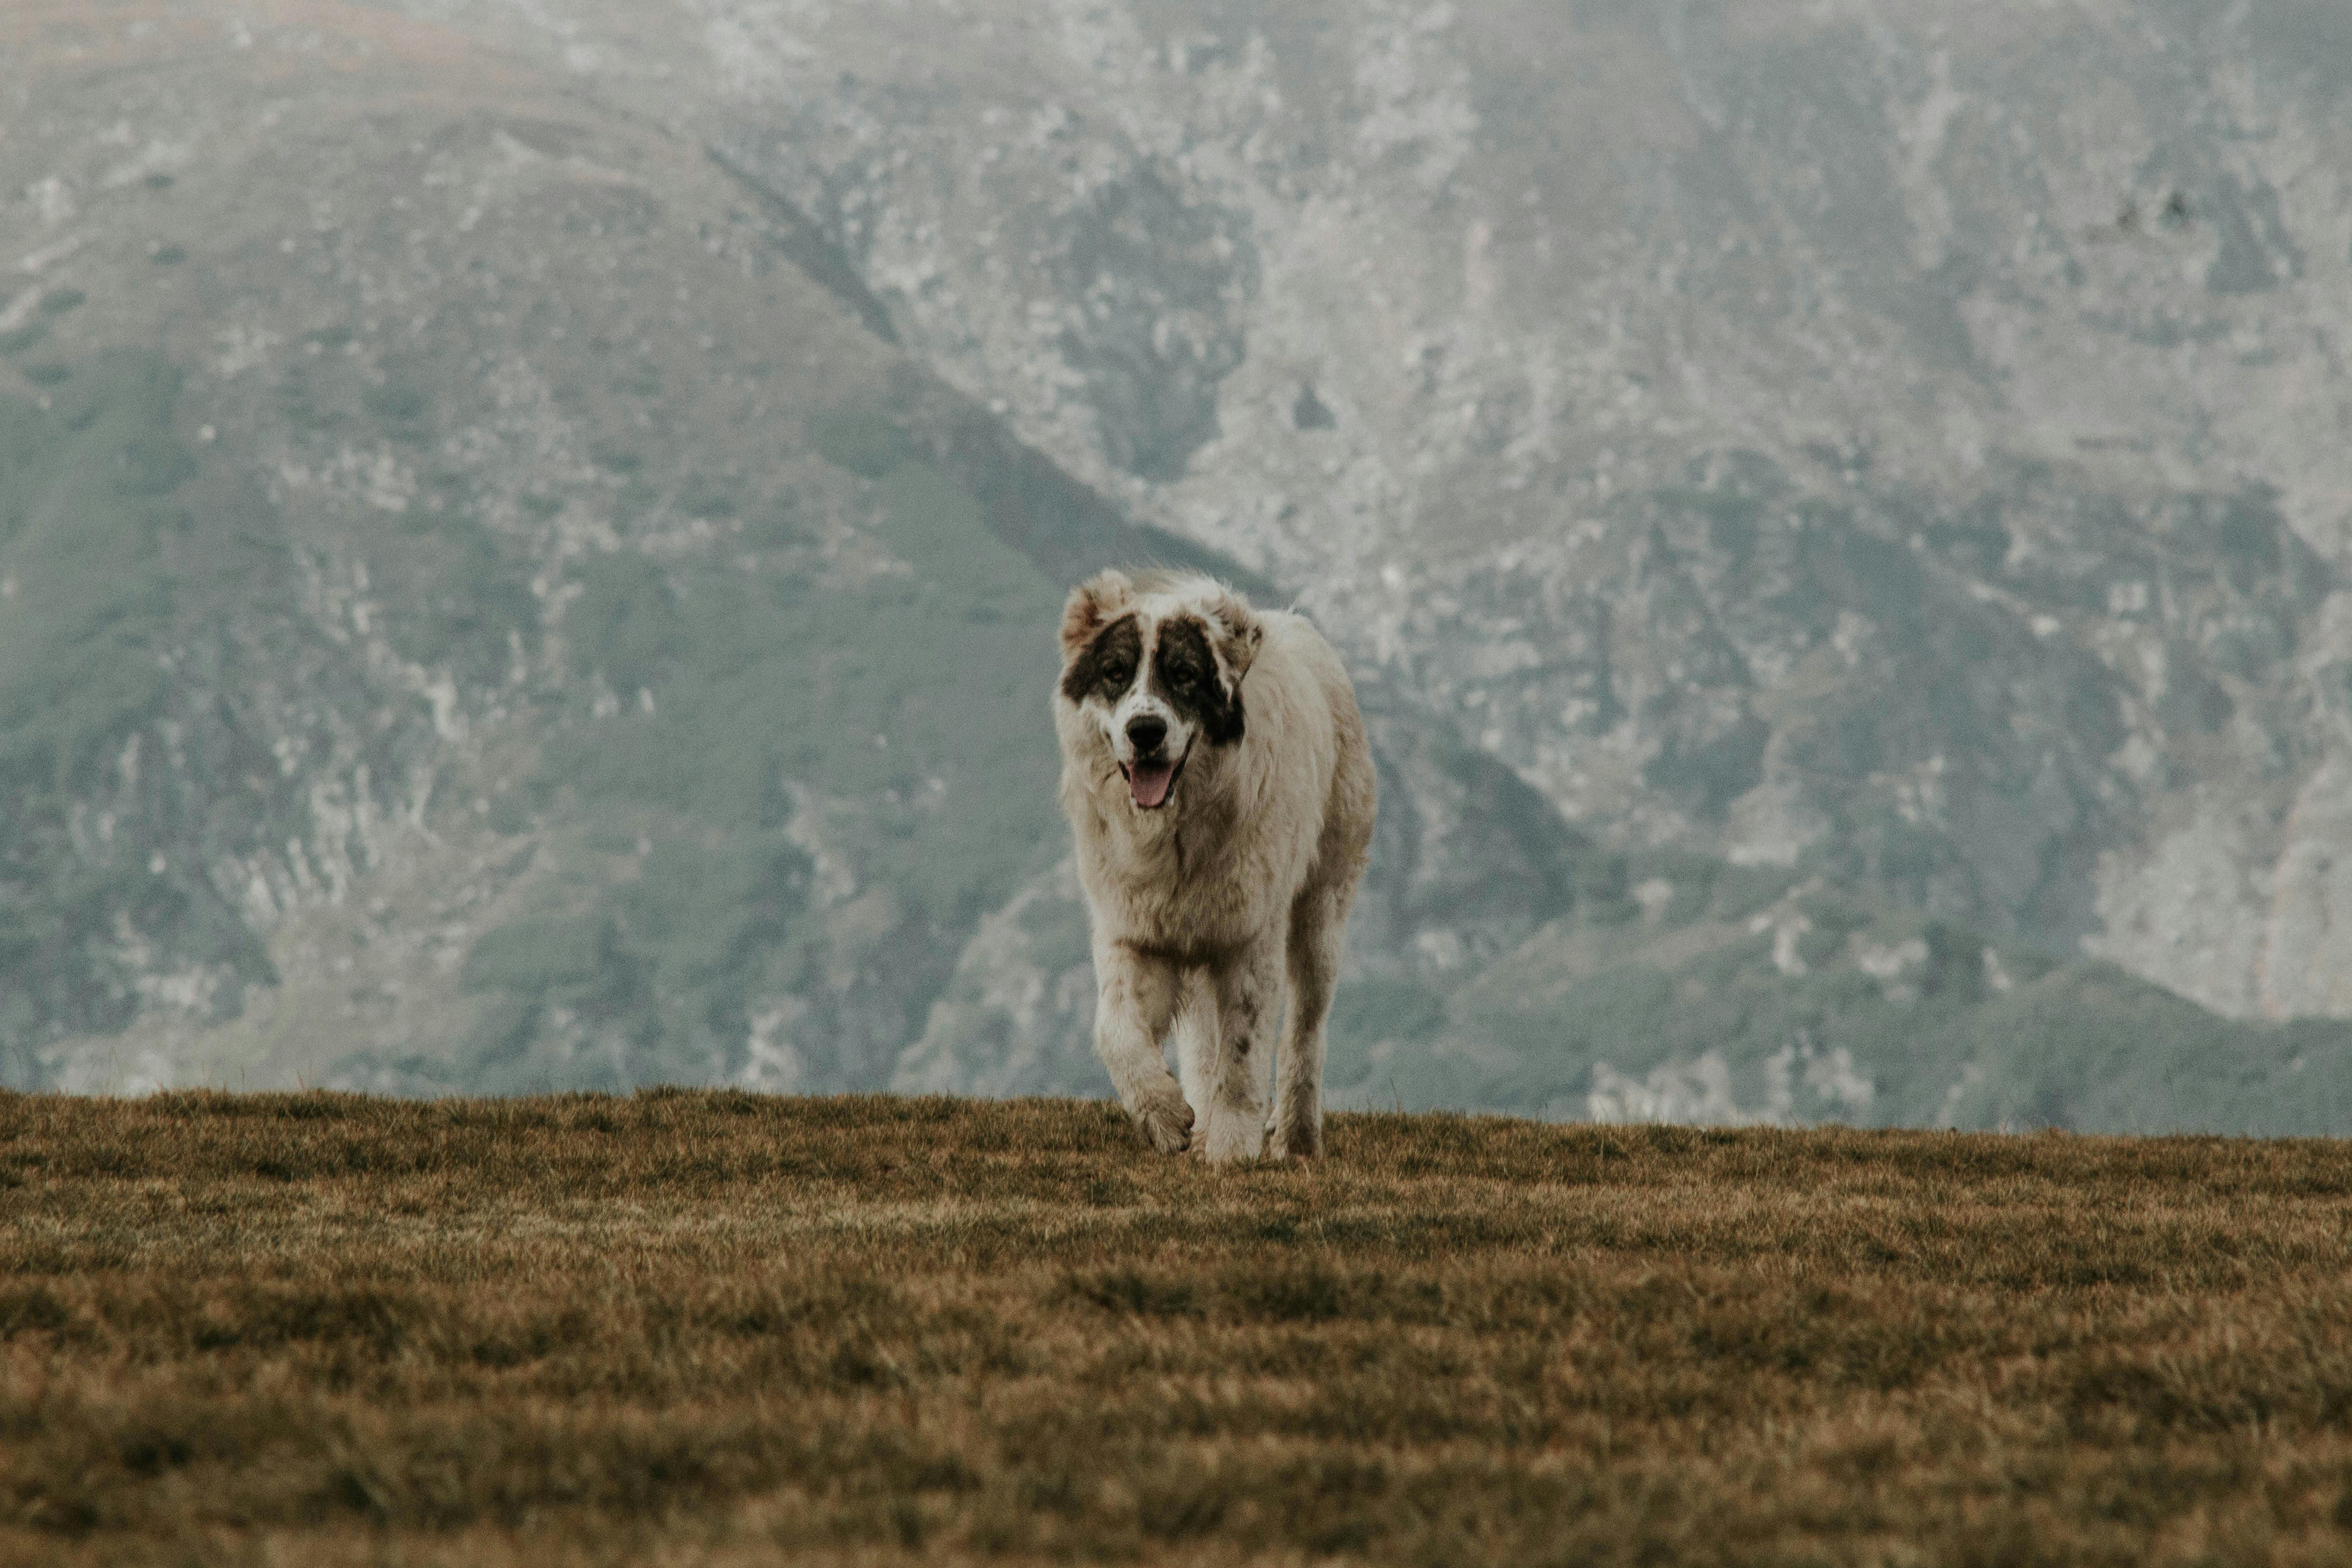 Dog Standing on Grass Field With a View of Mountain